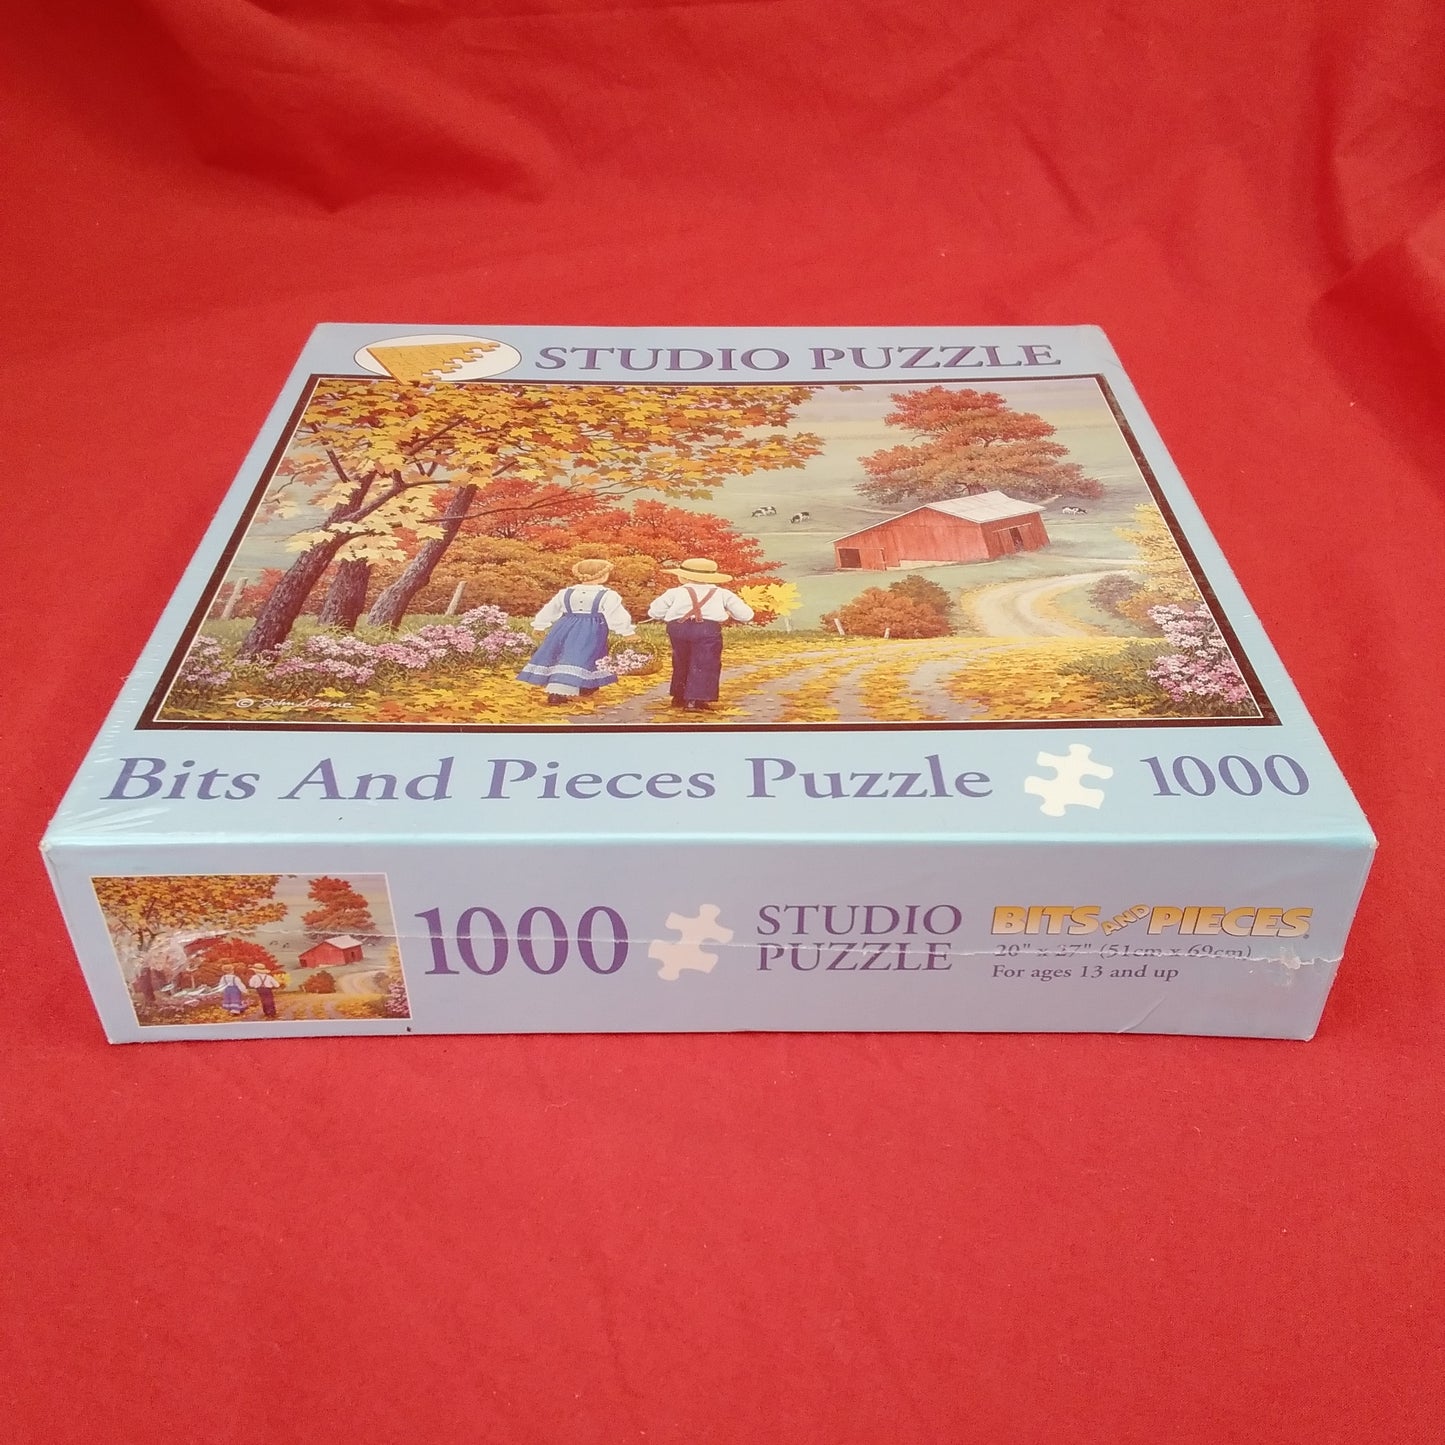 NIB - Golden Days - Bits & Pieces 1000 Piece Studio Jigsaw Puzzle - Ages: 13 and up